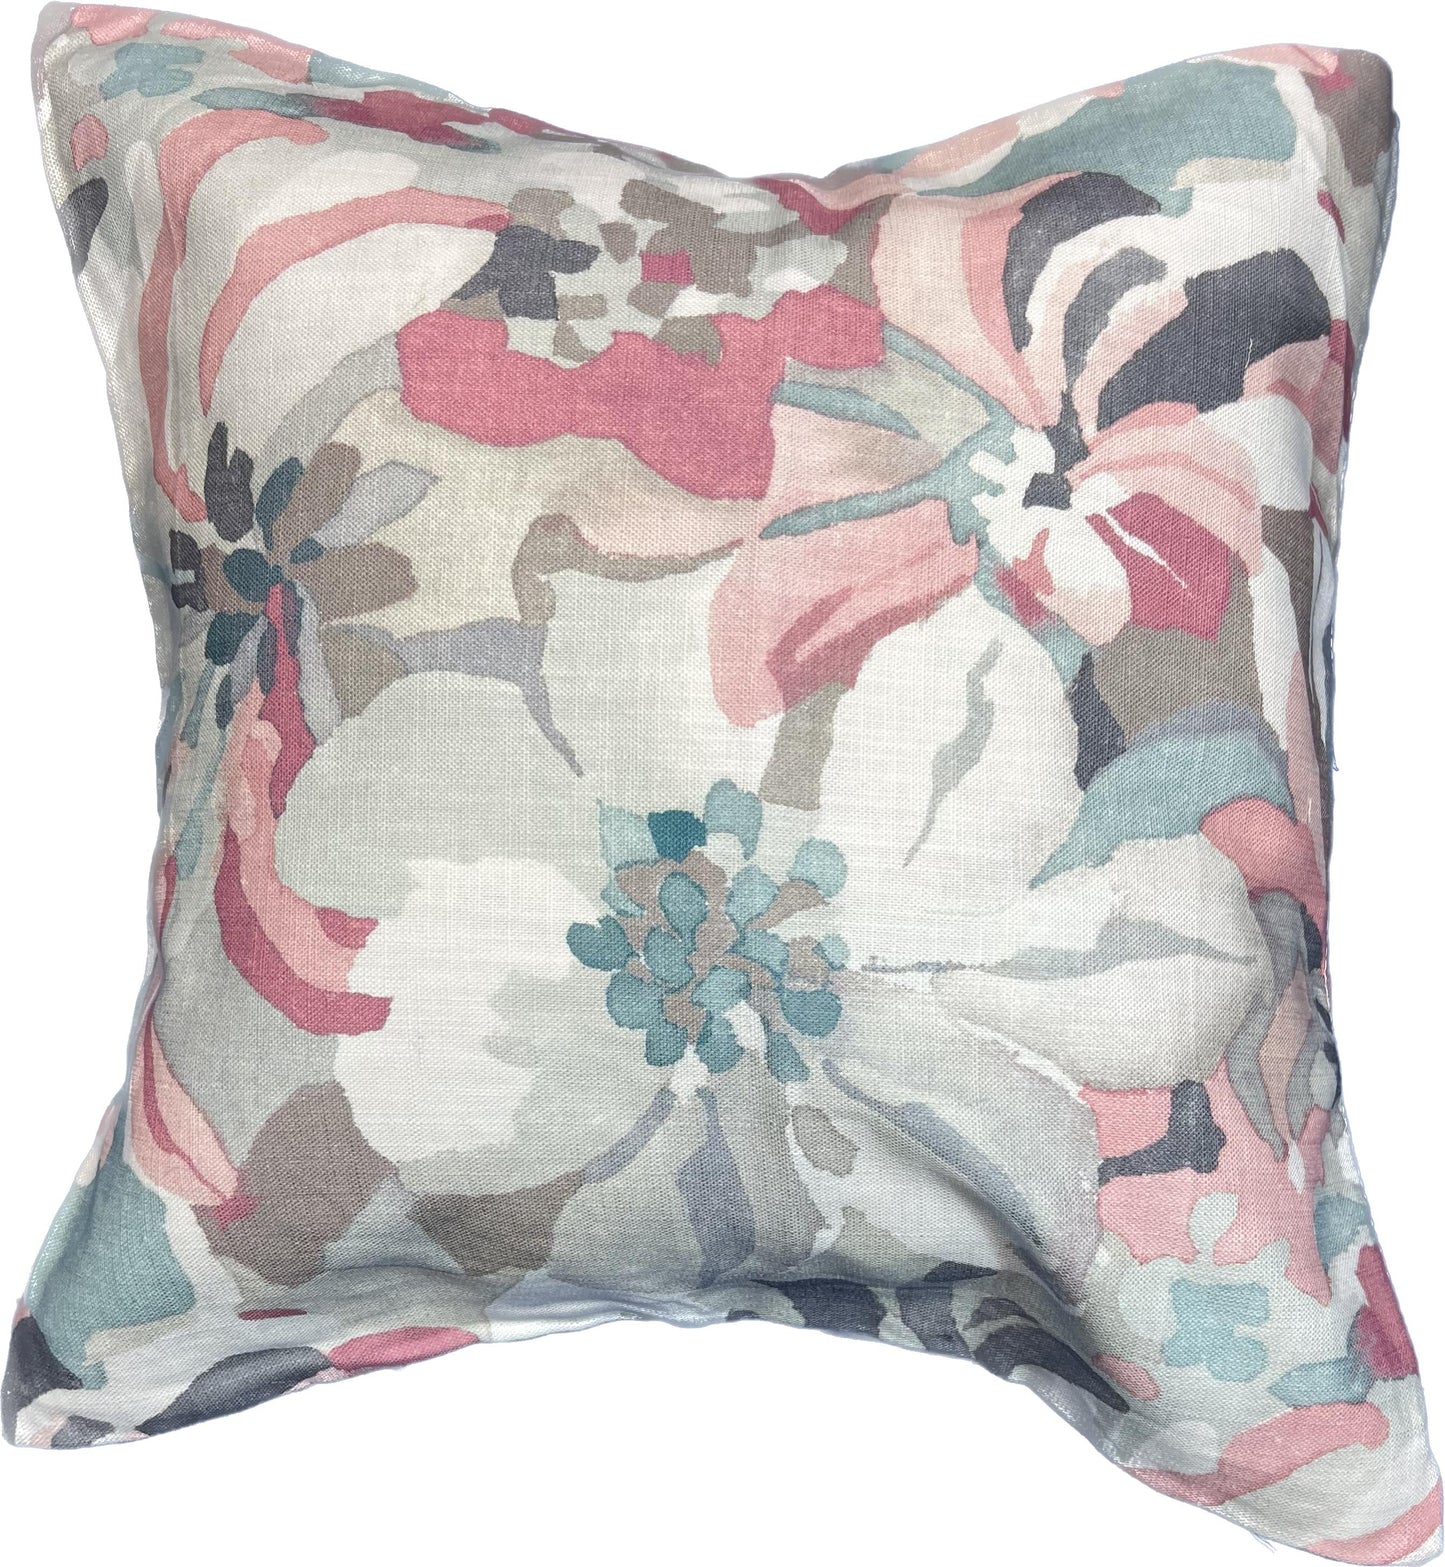 18"x18"  Watercolor Pillow Cover